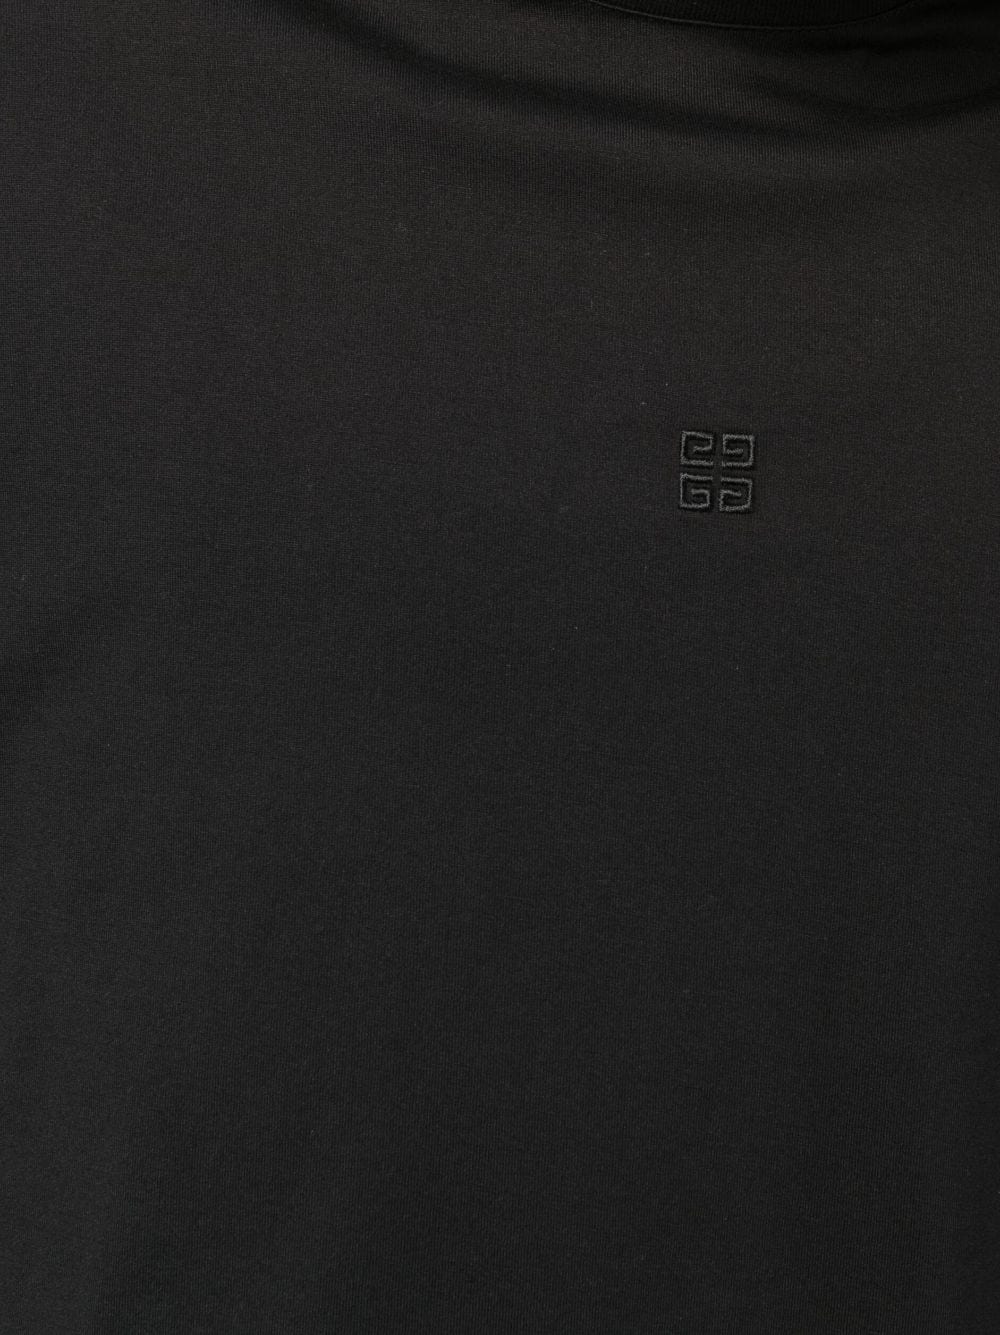 Shop Givenchy Embroidered Logo Cotton T-shirt In Black